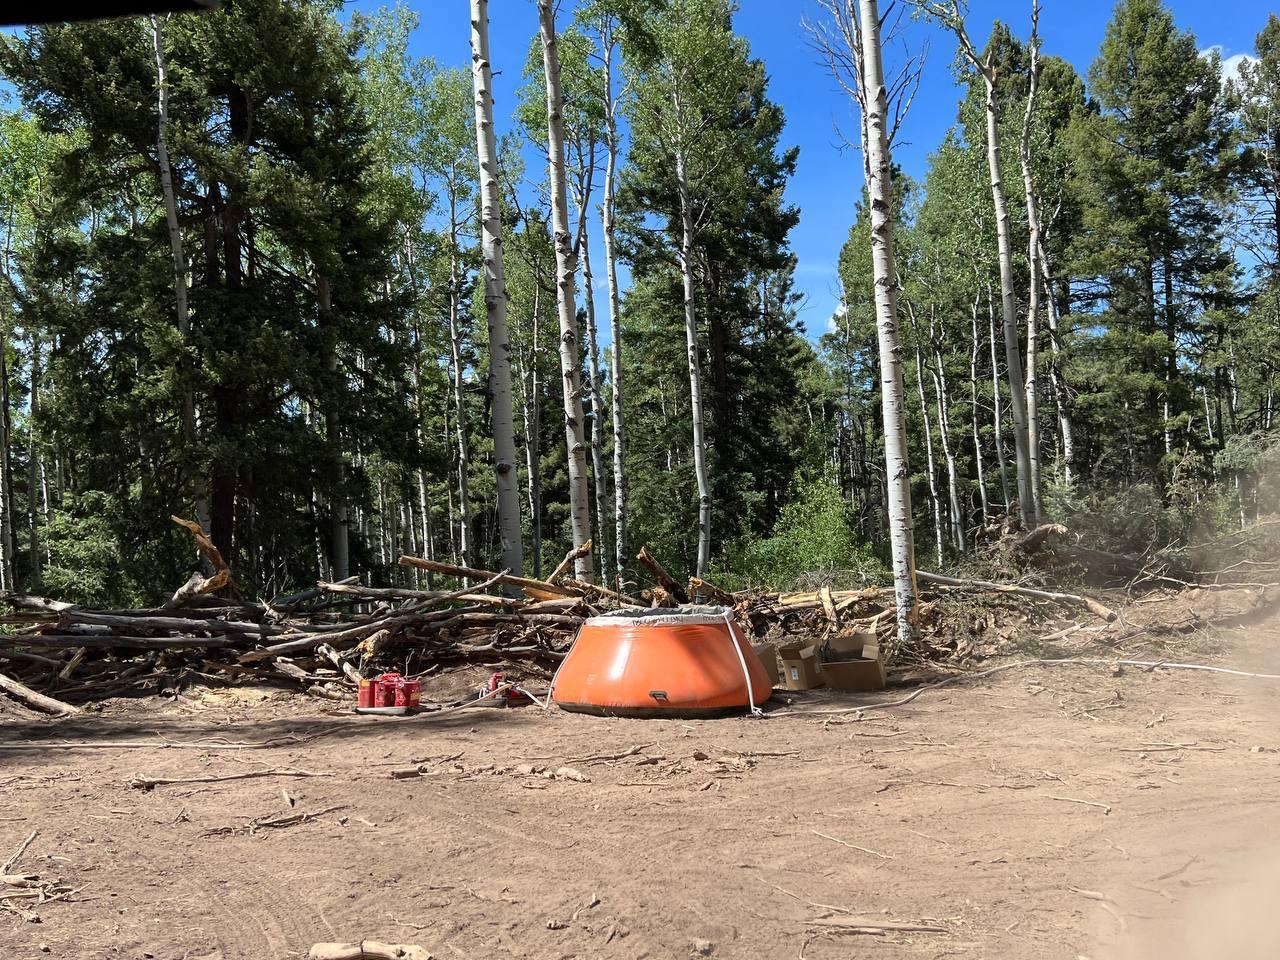 Orange tank known as a pumpkin with white hose, red gas cans, red pump sitting on a cleared area of dirt.  Pile of downed trees behind equipment with forested area in background.